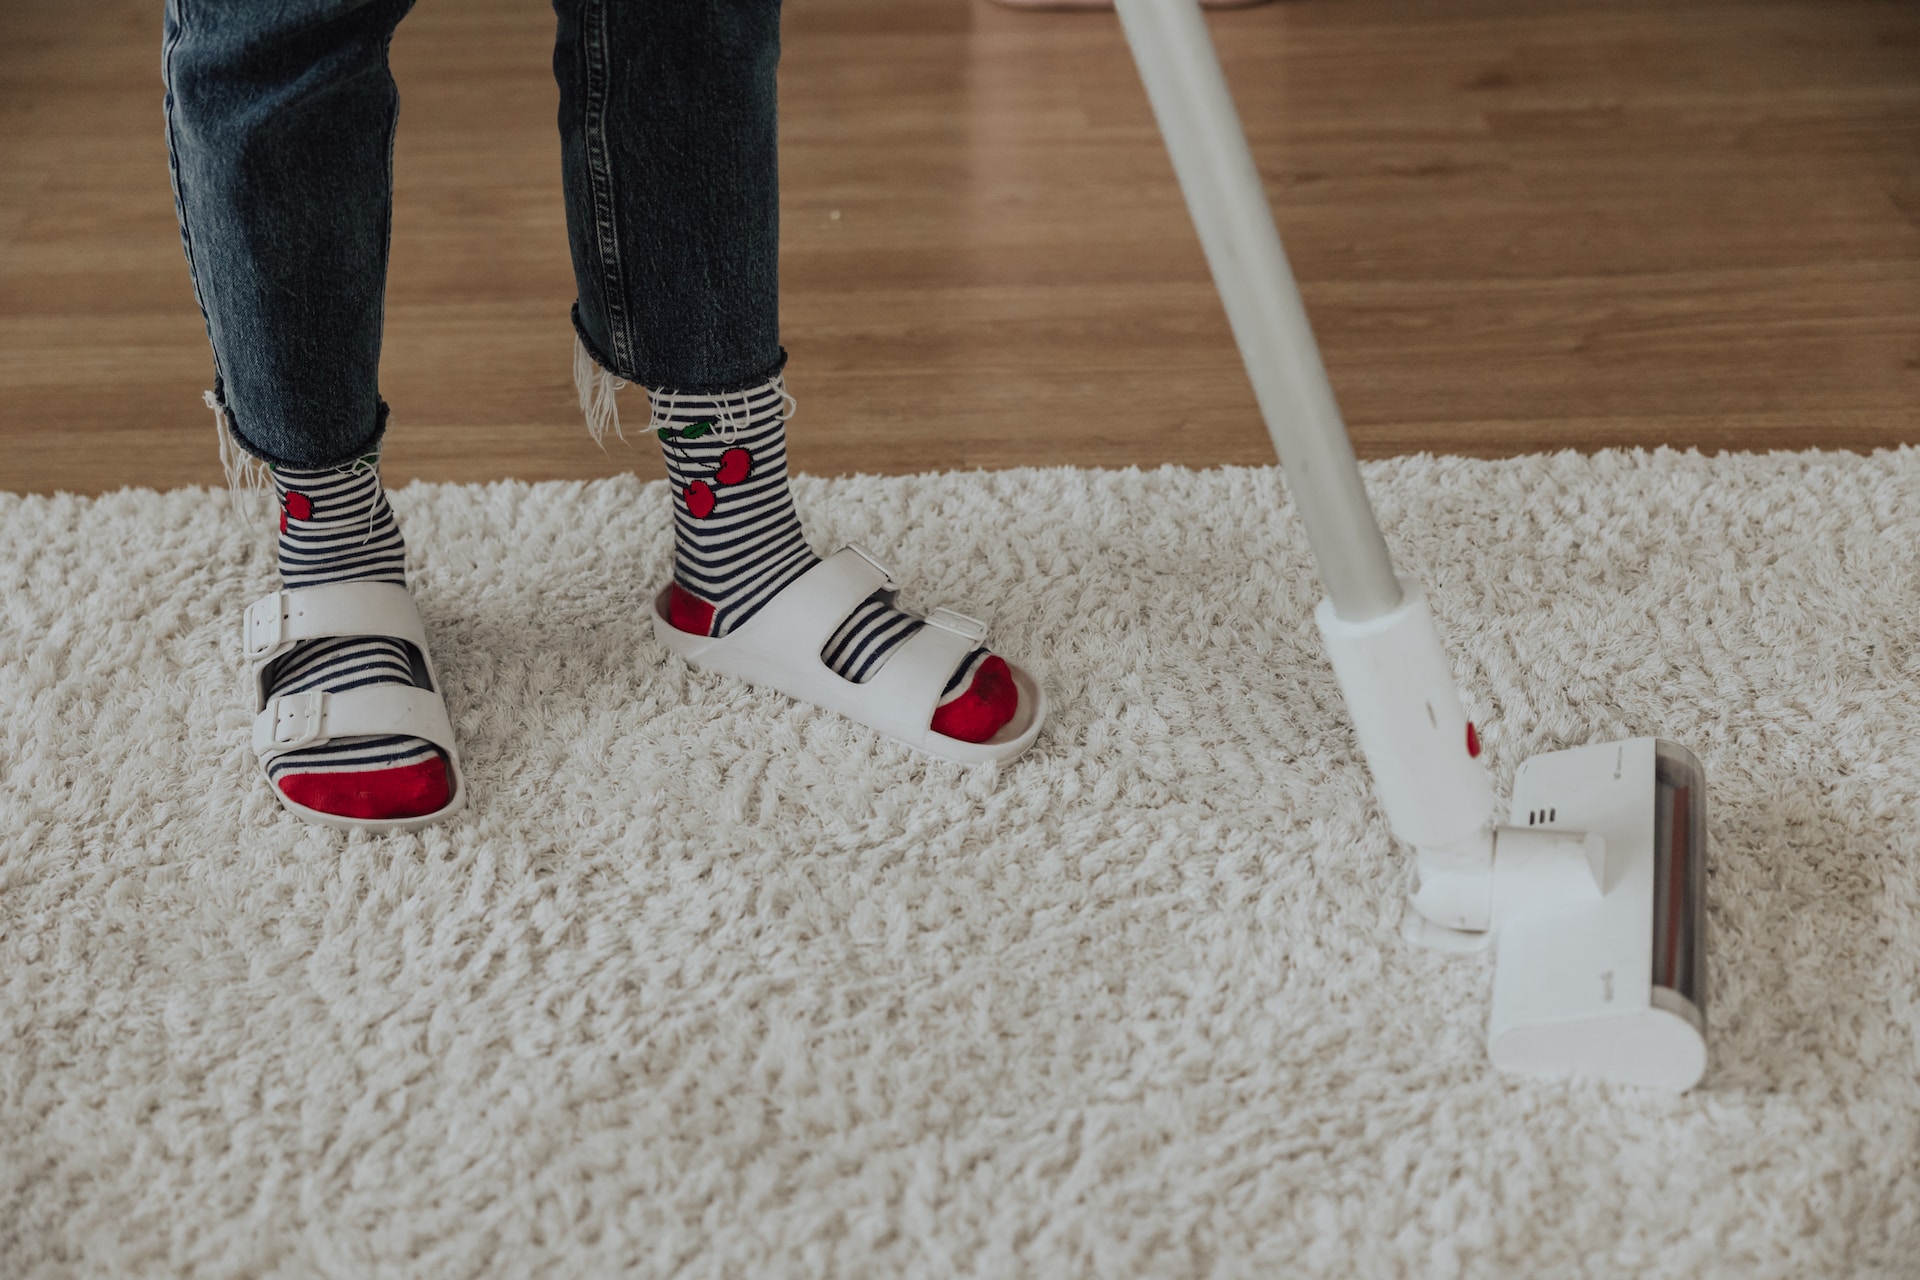 You are currently viewing Breathe New Life into Your Home with Professional Carpet Cleaning Services in Anne Arundel County, Maryland